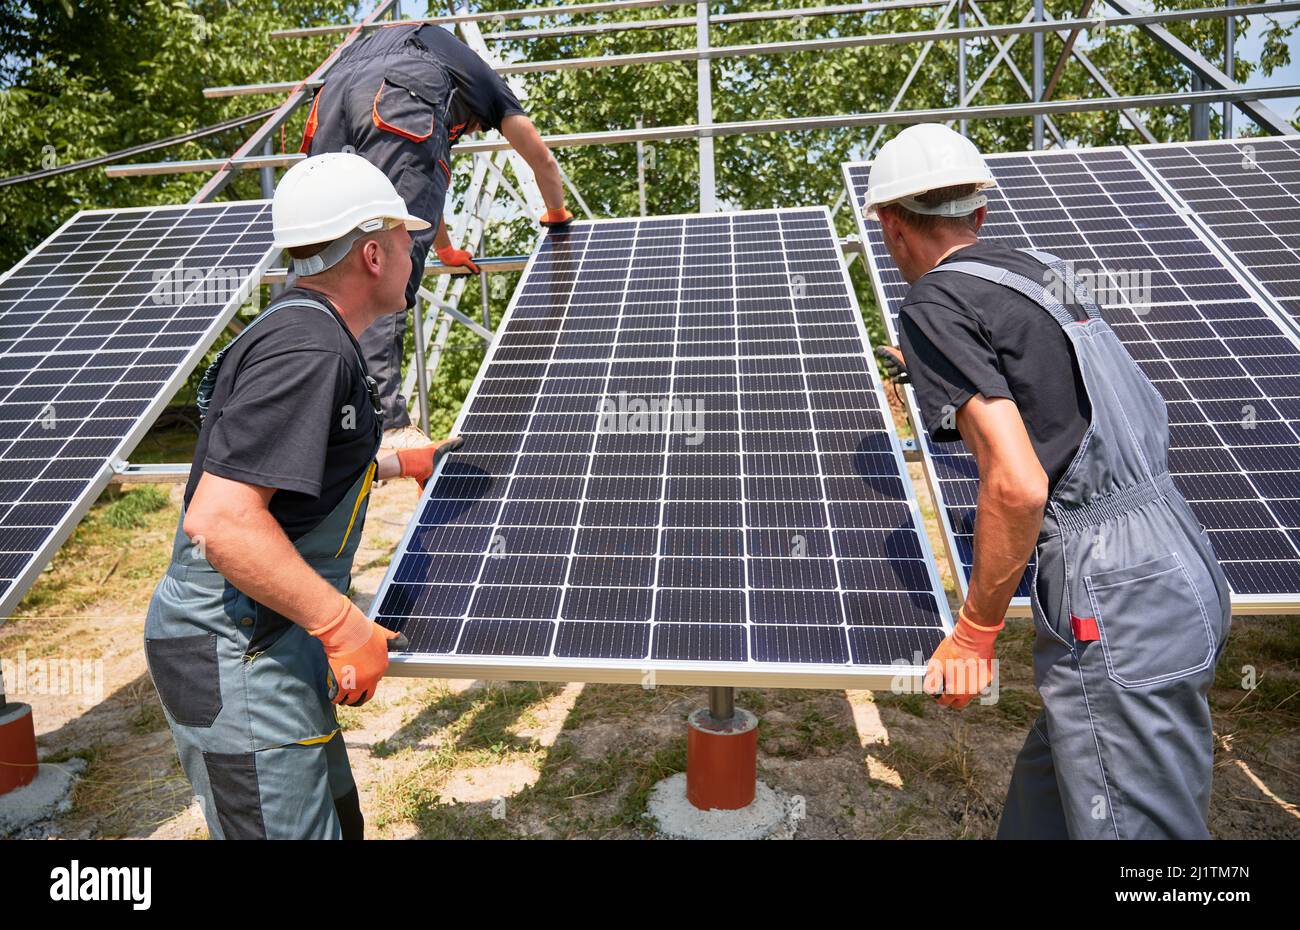 Workers building photovoltaic solar panel system outdoors. Men engineers placing solar module on metal rails, wearing construction helmets and work gloves. Renewable and ecological energy. Stock Photo